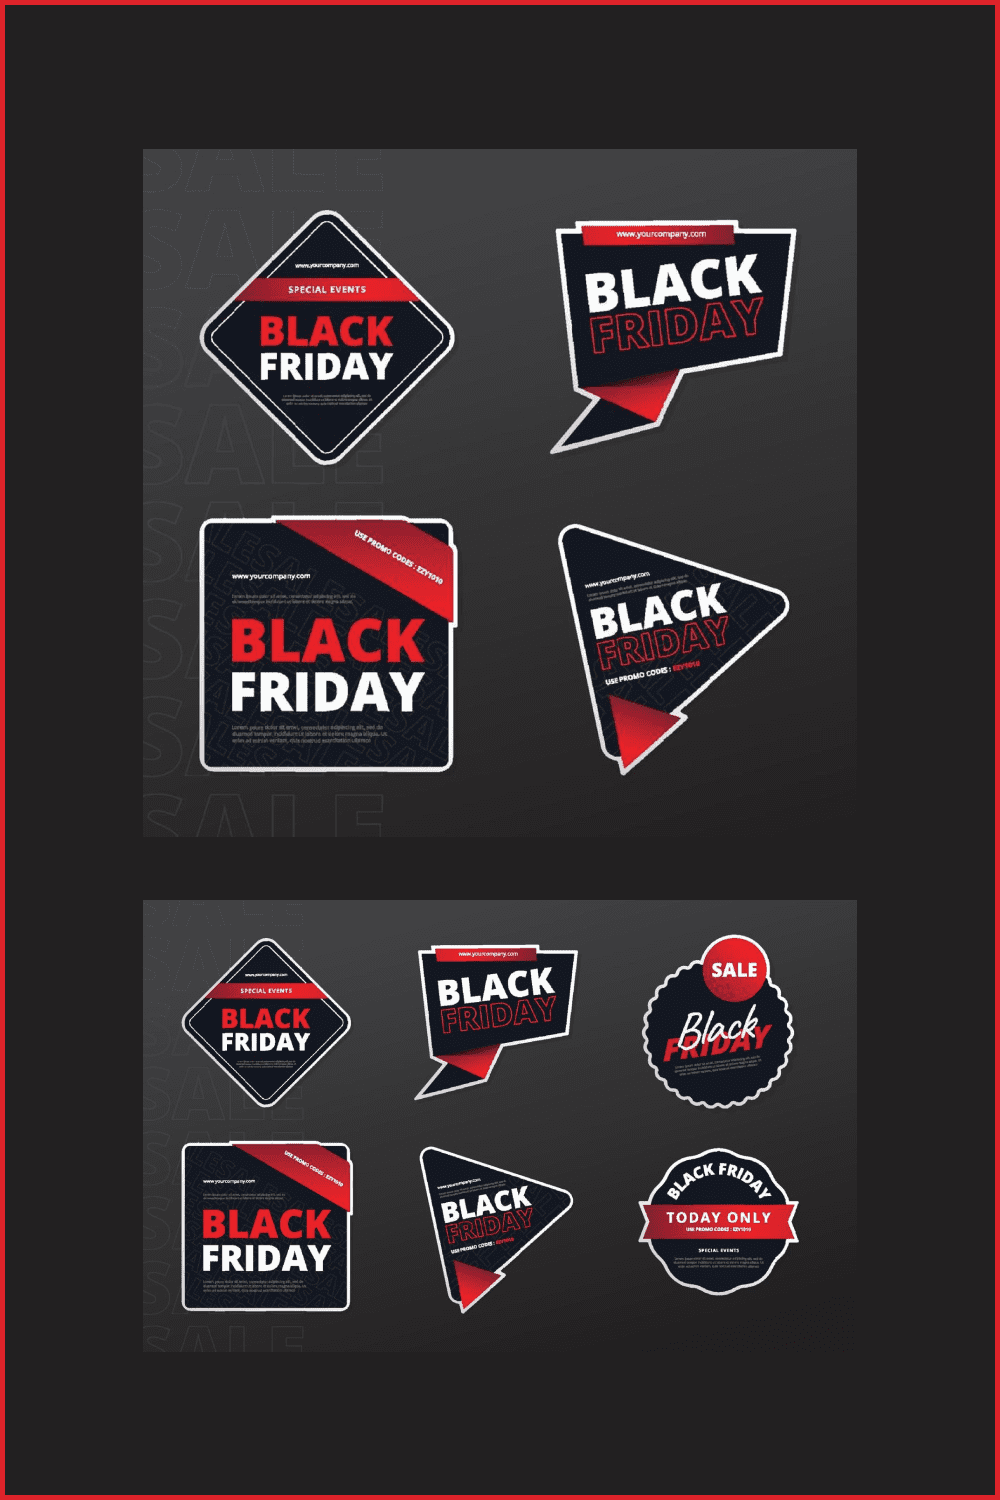 Collage of stickers for Black Friday.